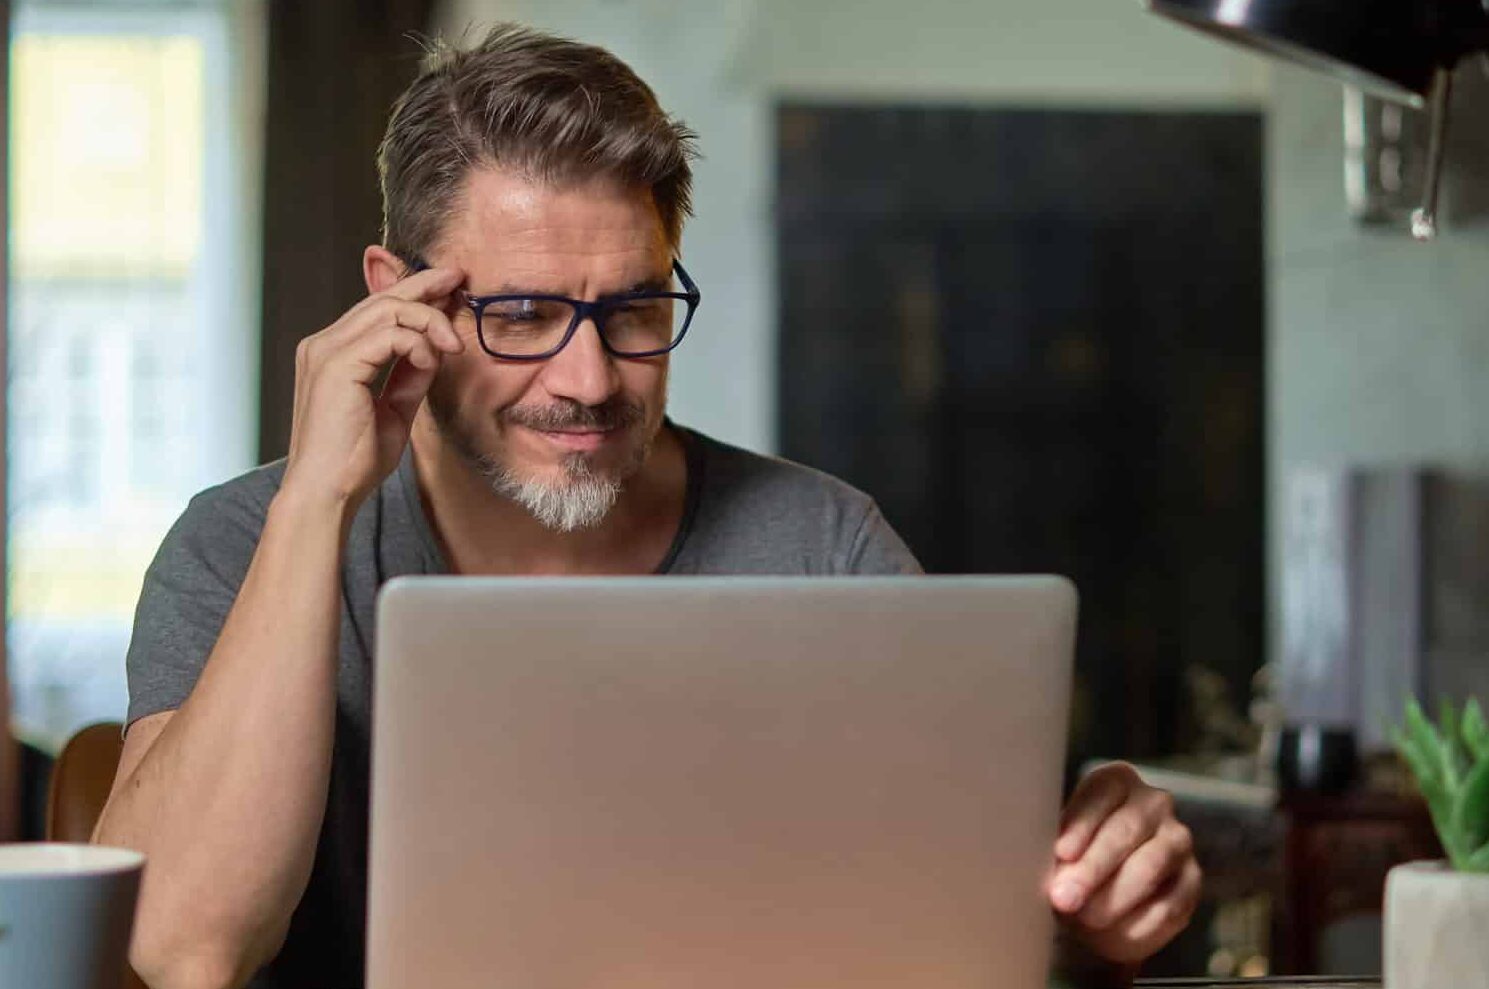 Man wearing glasses and working on a computer